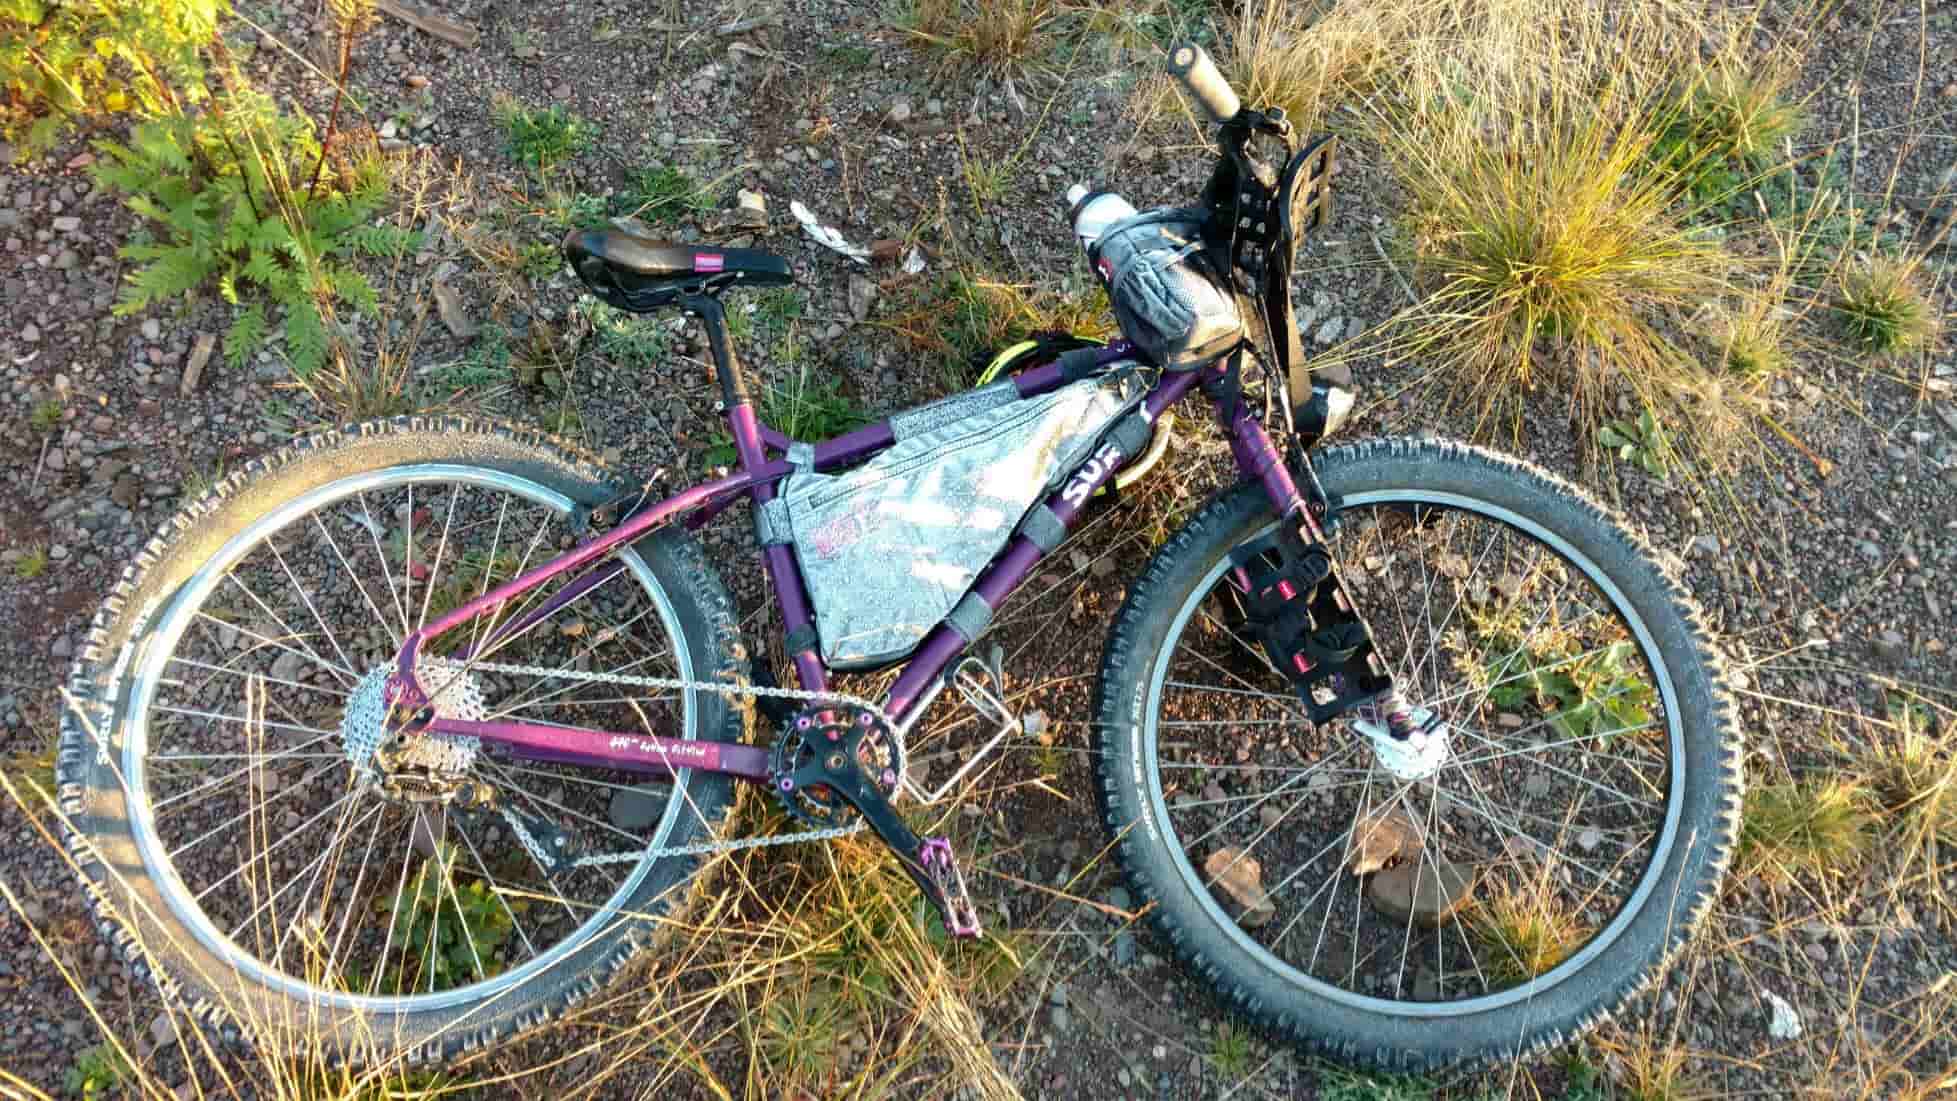 Downward left side view of a purple Surly Troll bike loaded with gear, laying on it's left side in gravel and weeds